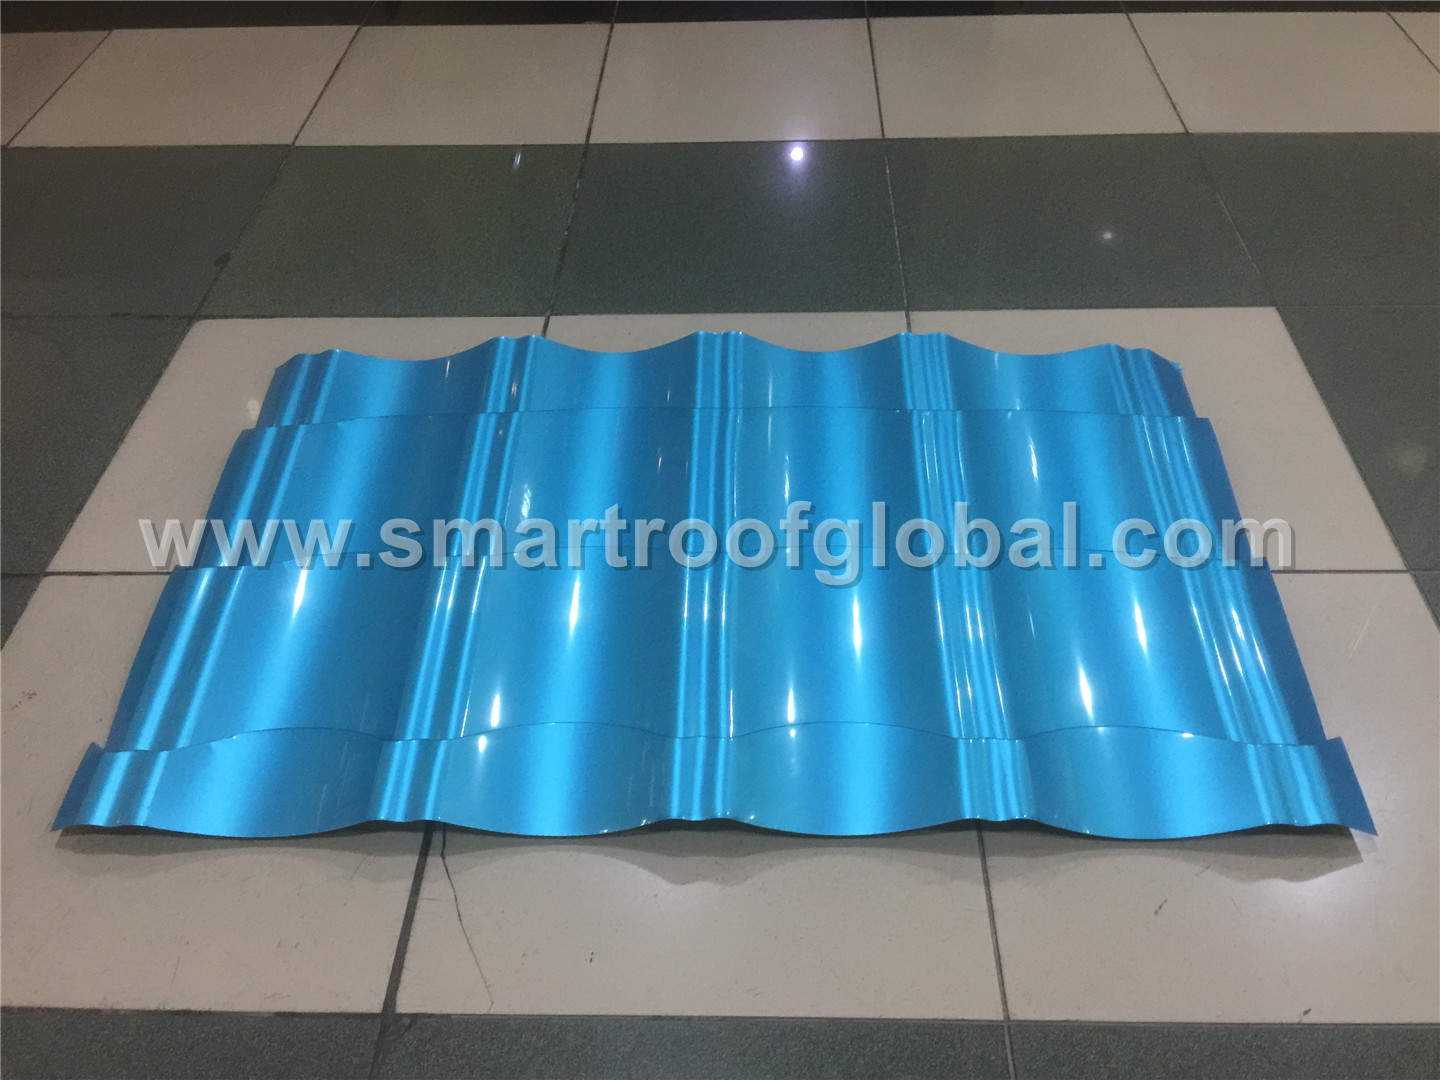 2019 Good Quality Galvanized Corrugated Metal Roofing - Wholesale Metal Roofing – Smartroof